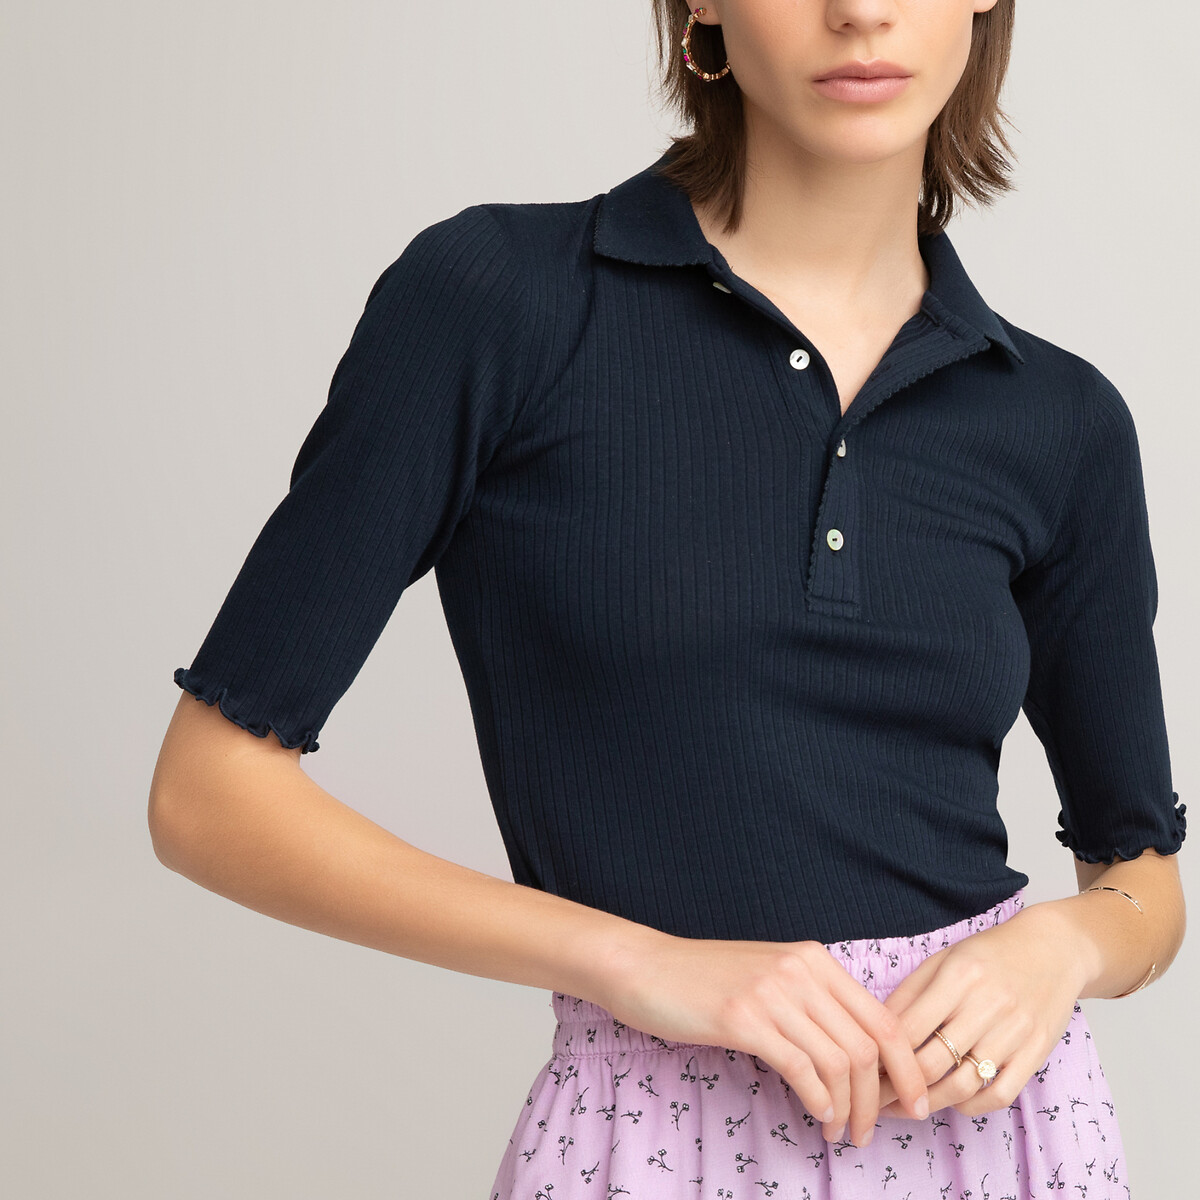 Ribbed polo shirt with short sleeves, navy blue, La Redoute